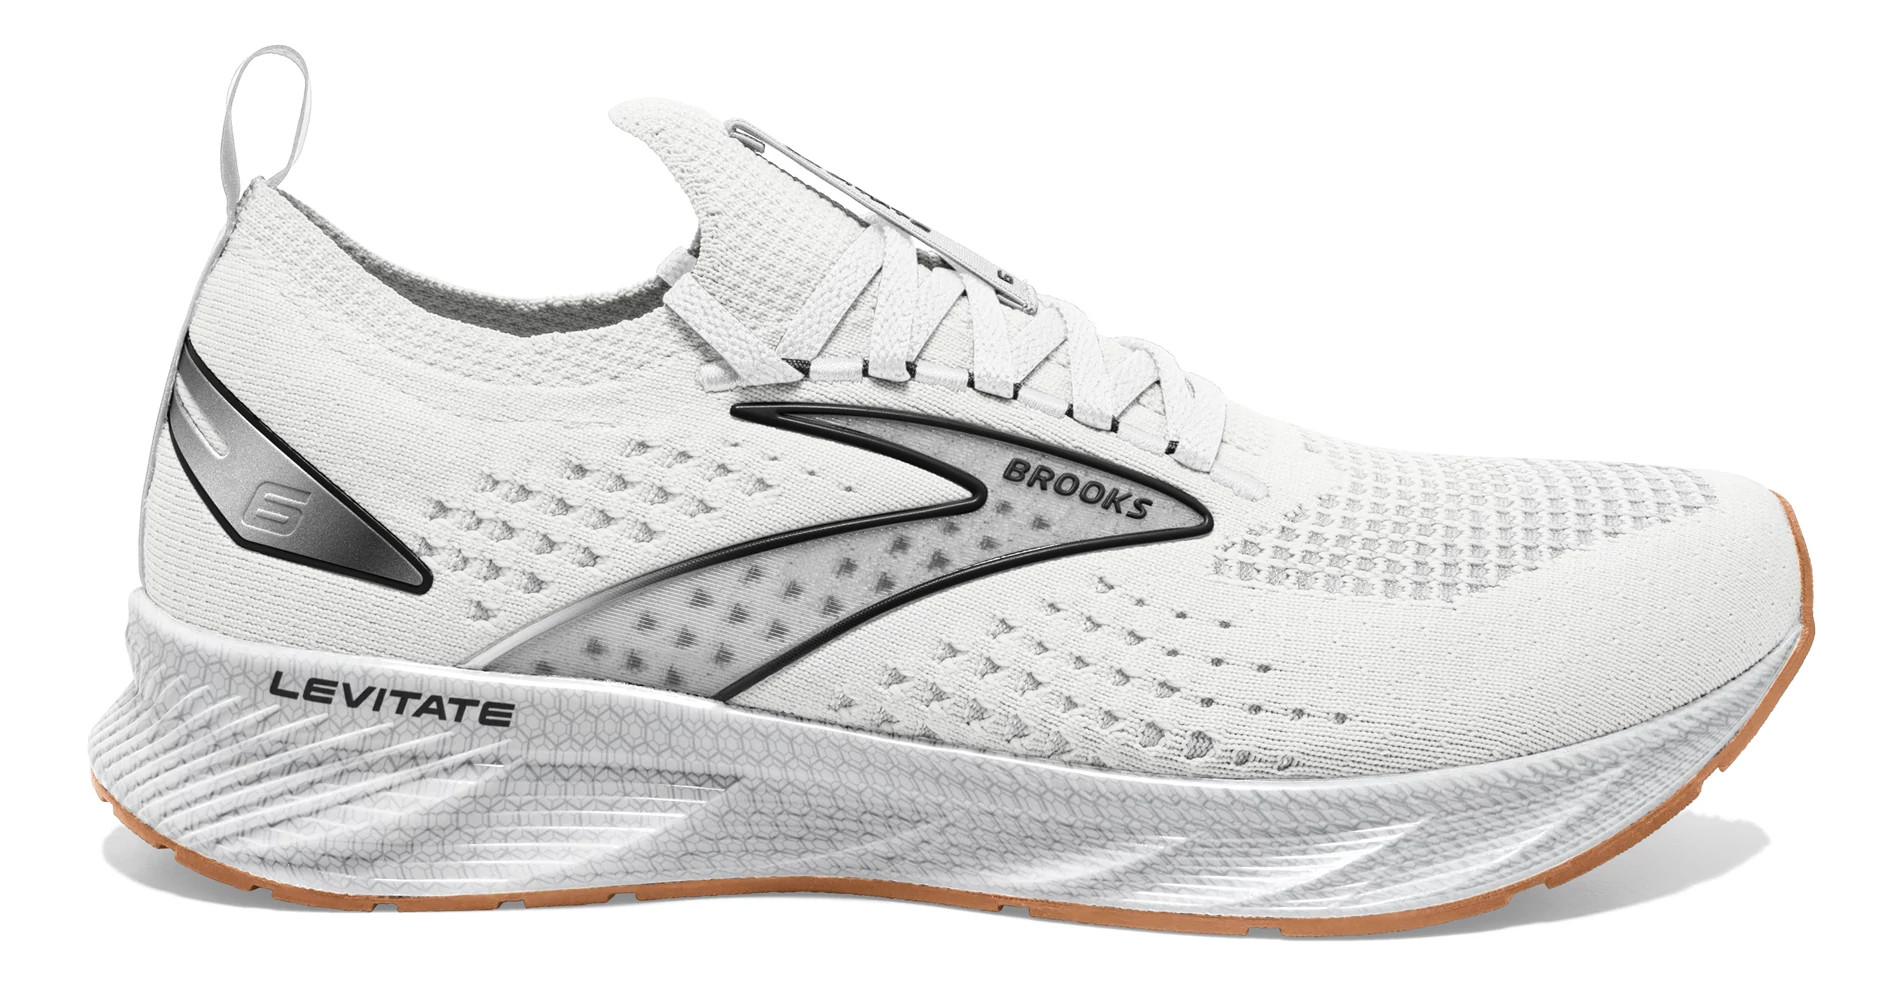 Brooks Levitate Running Shoes: Experience Energy-Returning Running Shoes